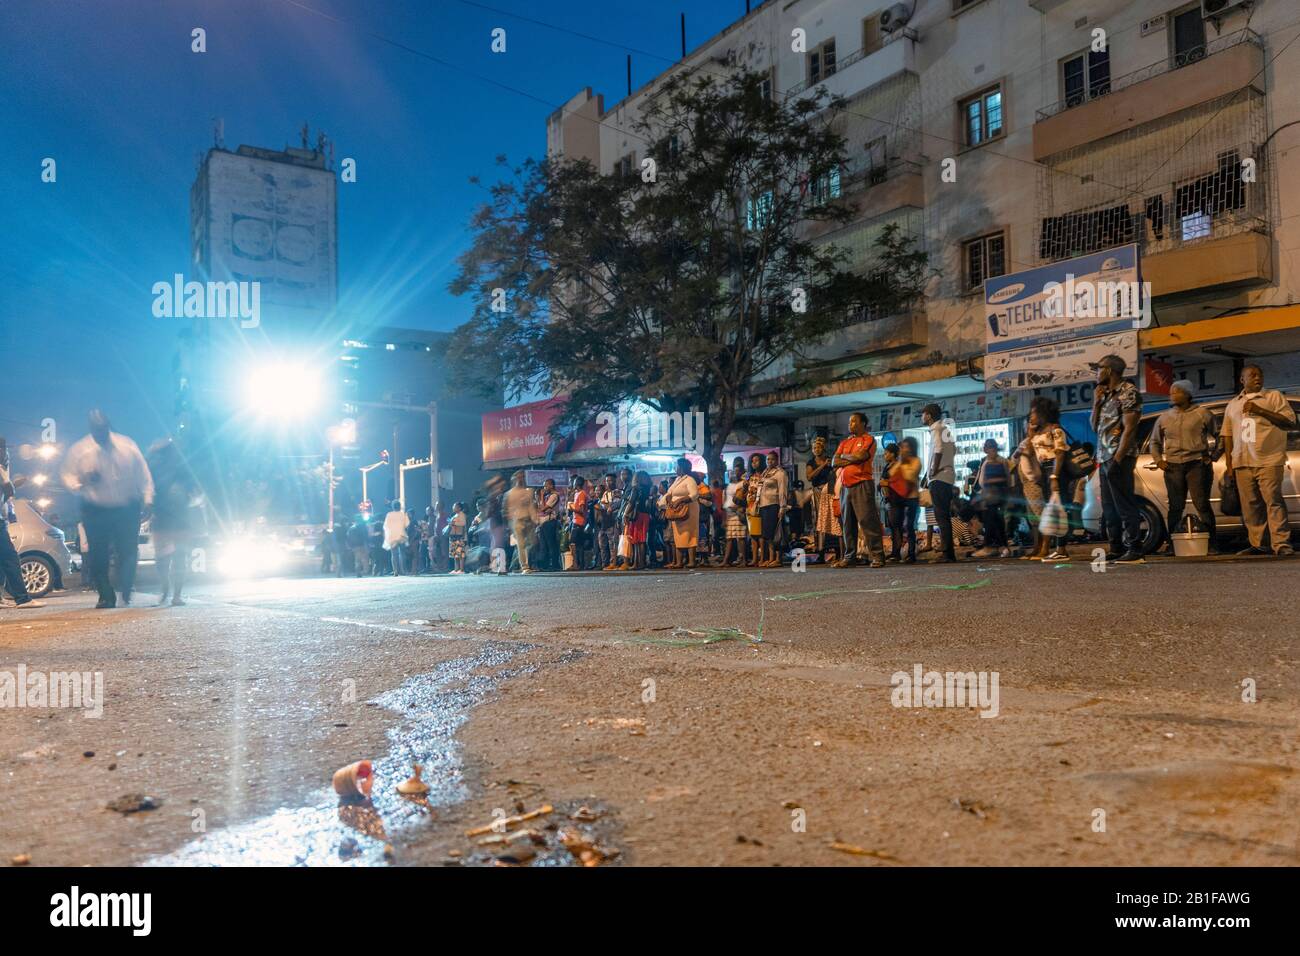 Maputo, Mozambique - May 15, 2019: Many local people waiting for a bus in the capital city Stock Photo